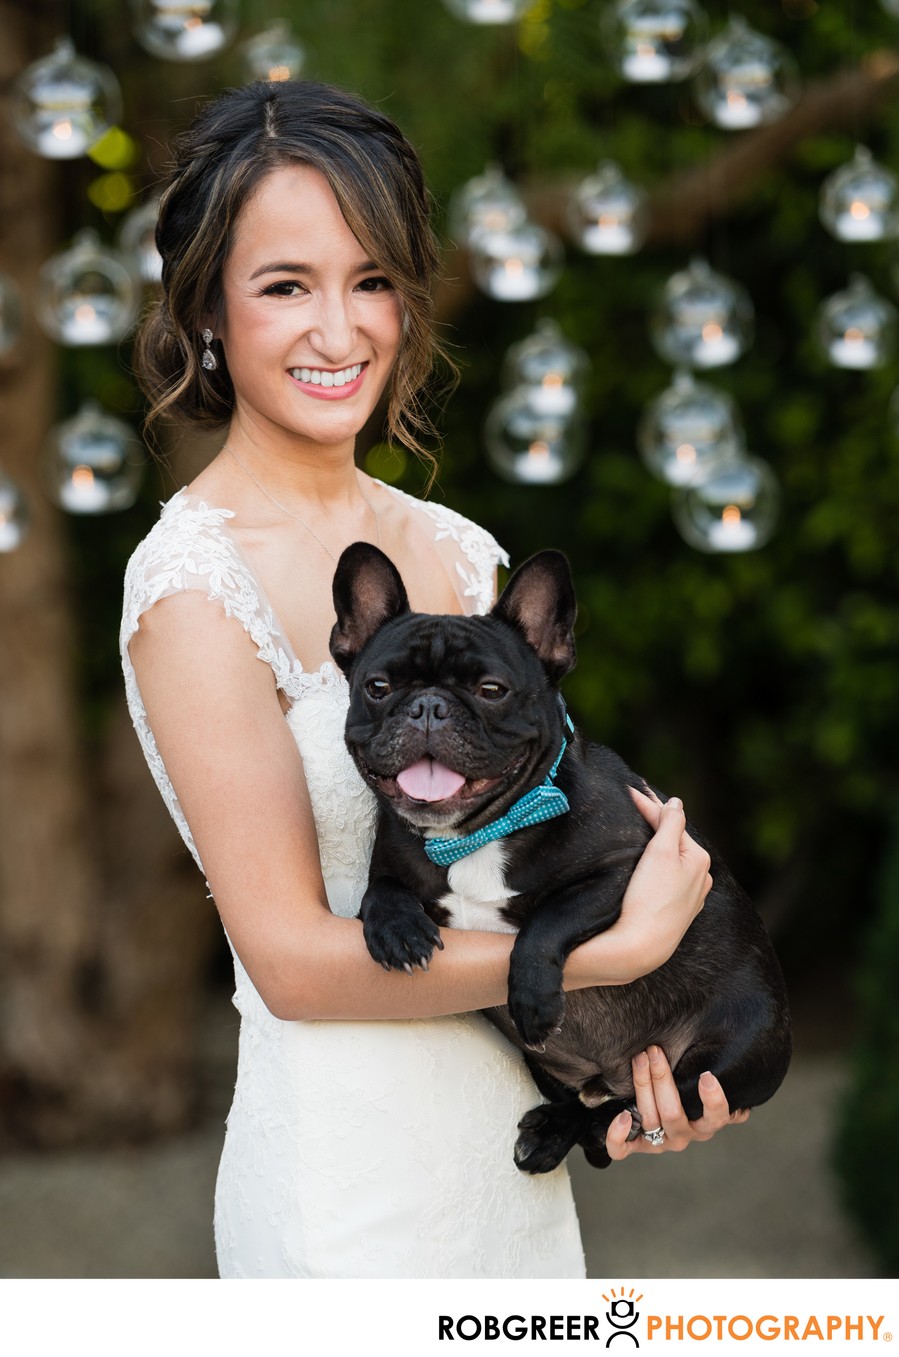 Bride Poses with Dog: Cocktail Hour